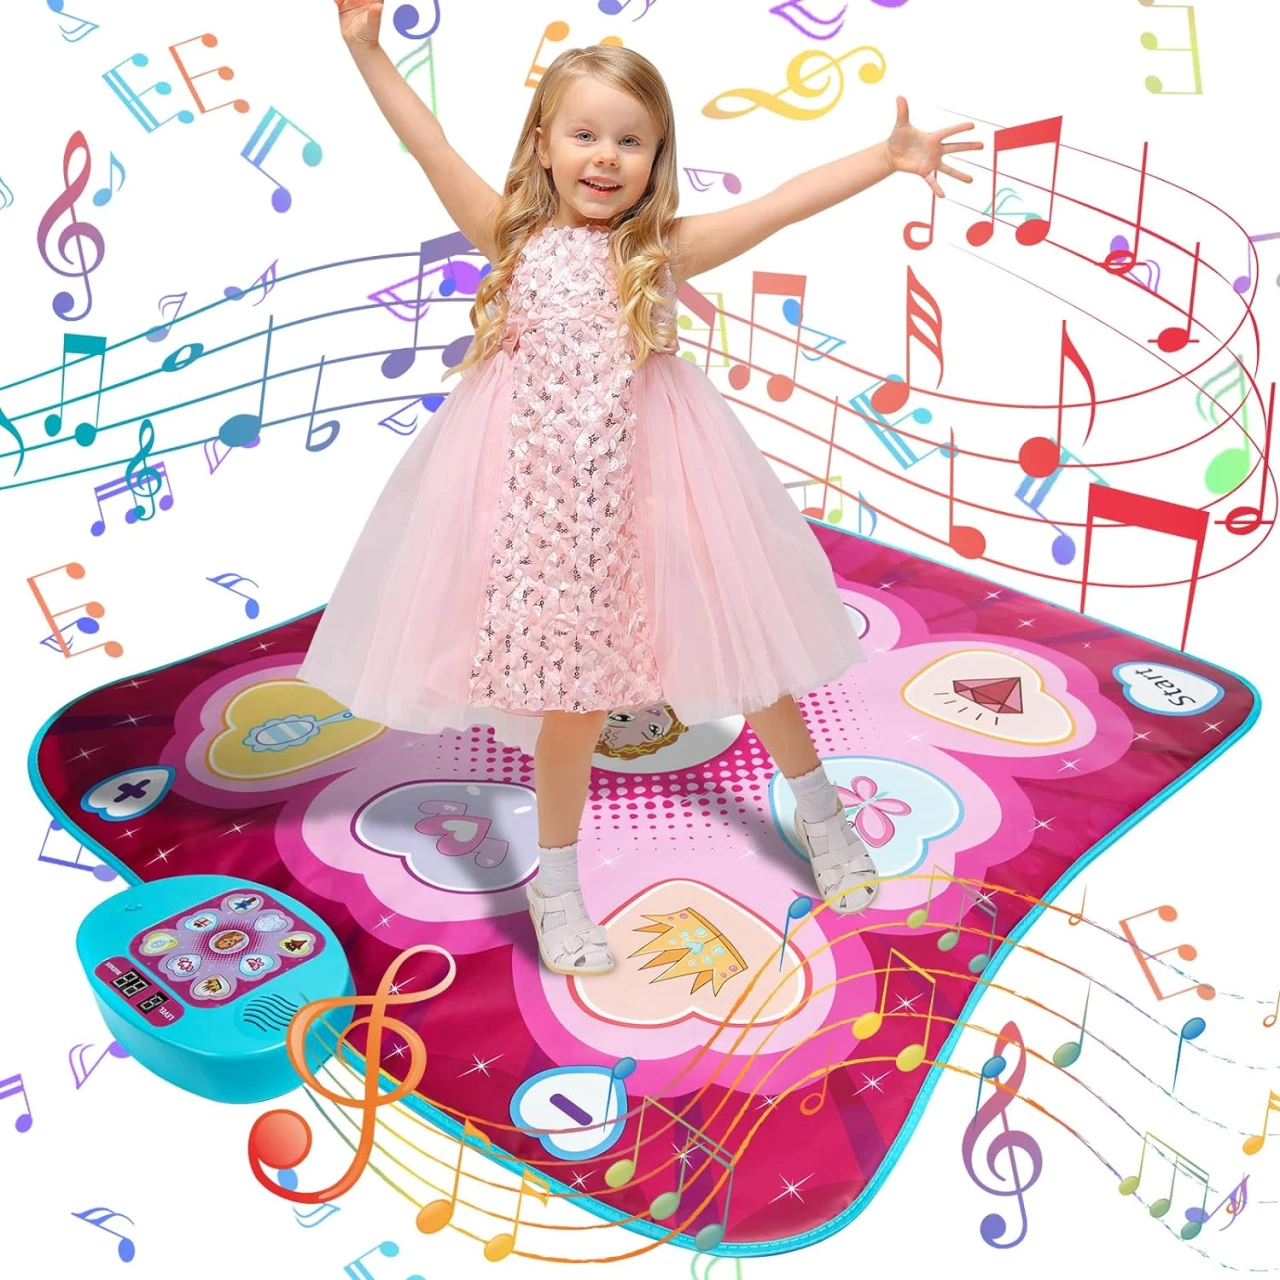 JUYOUNGA Dance Mat Gift for 3-12 Year Old Girls Boys Electronic Dance Pad Game Toy for Kids Age 4 5 6 7 8 9 10+